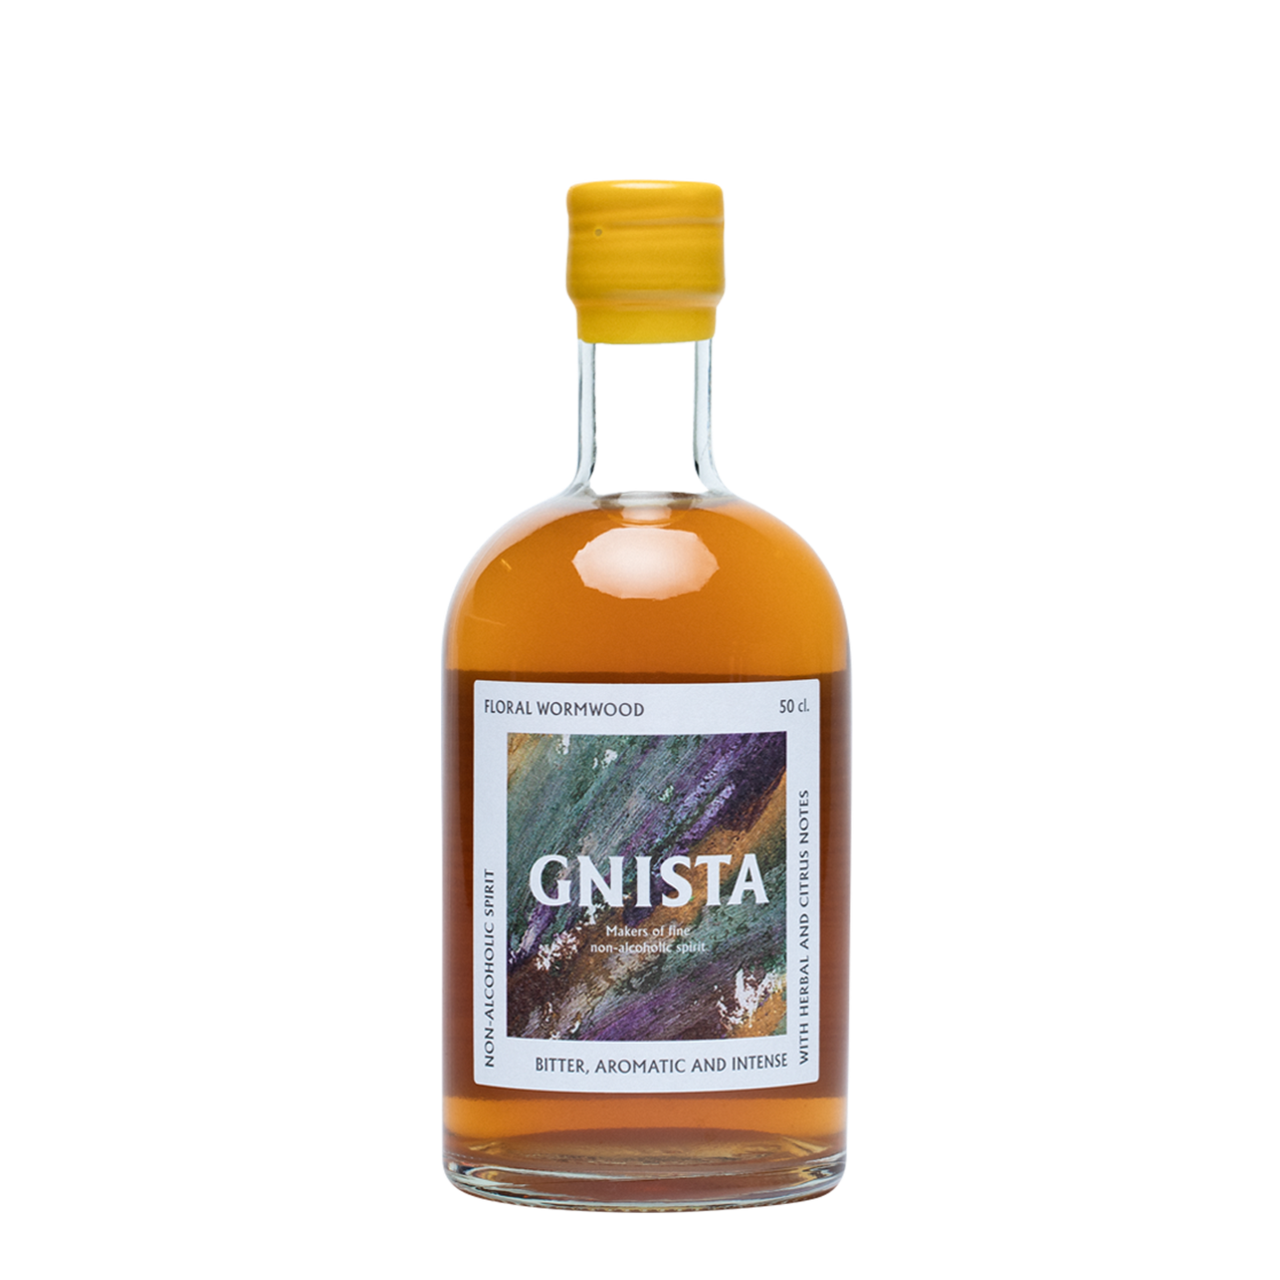 Gnista - Floral Wormwood